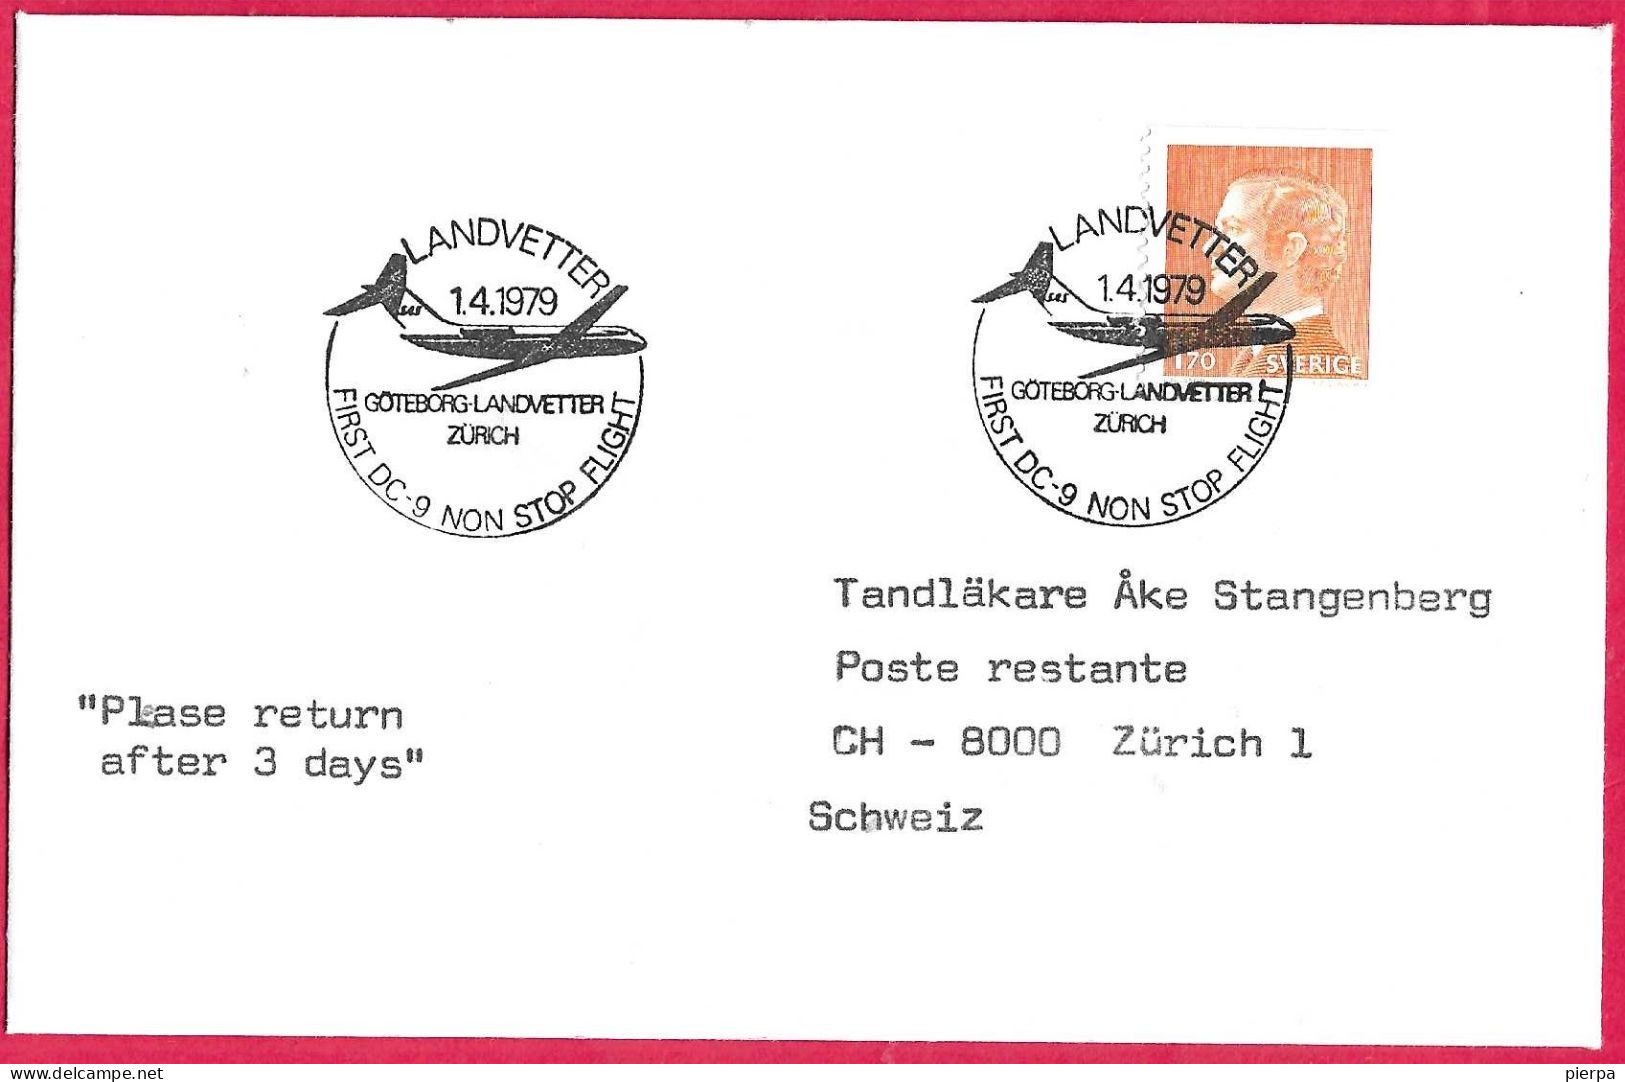 SVERIGE - FIRST DC-9 NON STOP FLIGHT FROM GOTEBORG TO ZURICH * 1.4.1979* ON OFFICIAL ENVELOPE - Covers & Documents